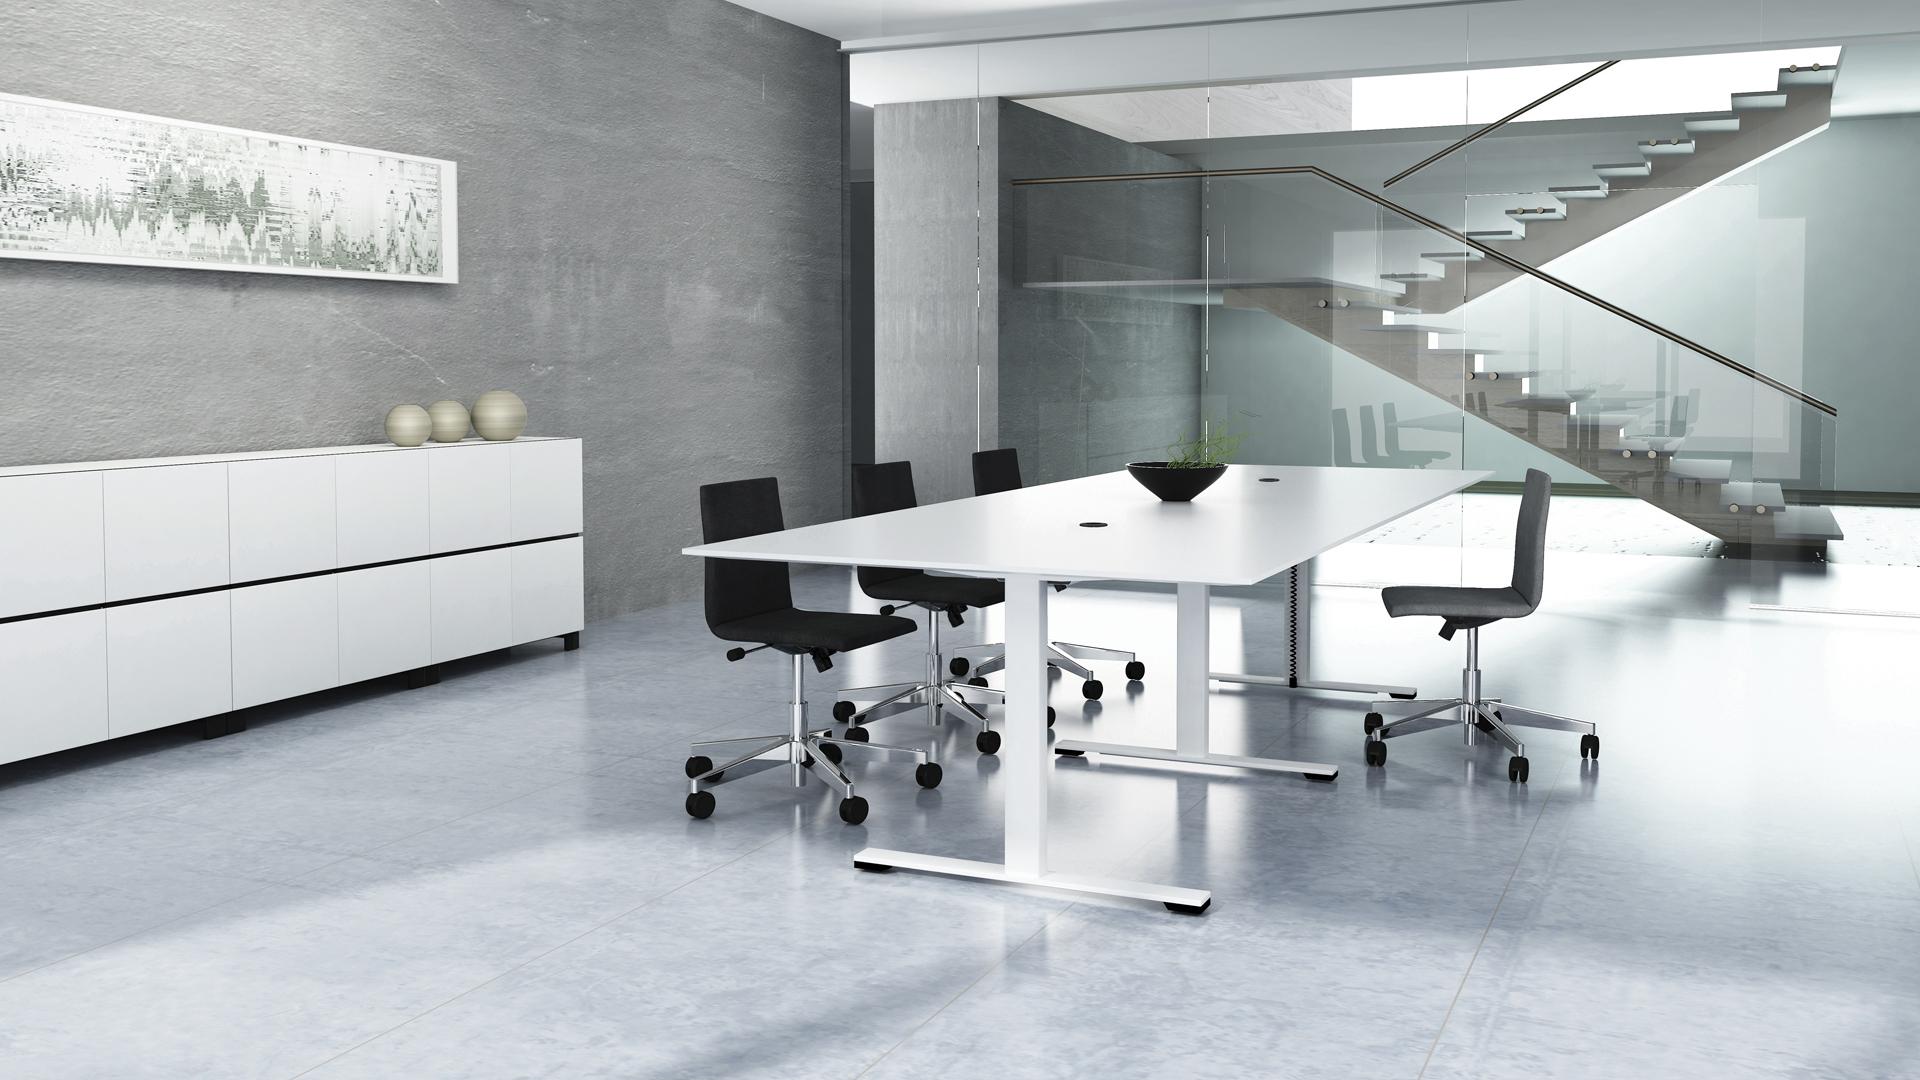 Jazz meeting tables are ideal for various kinds of meetings as they are available as height adjustable or fixed height tables